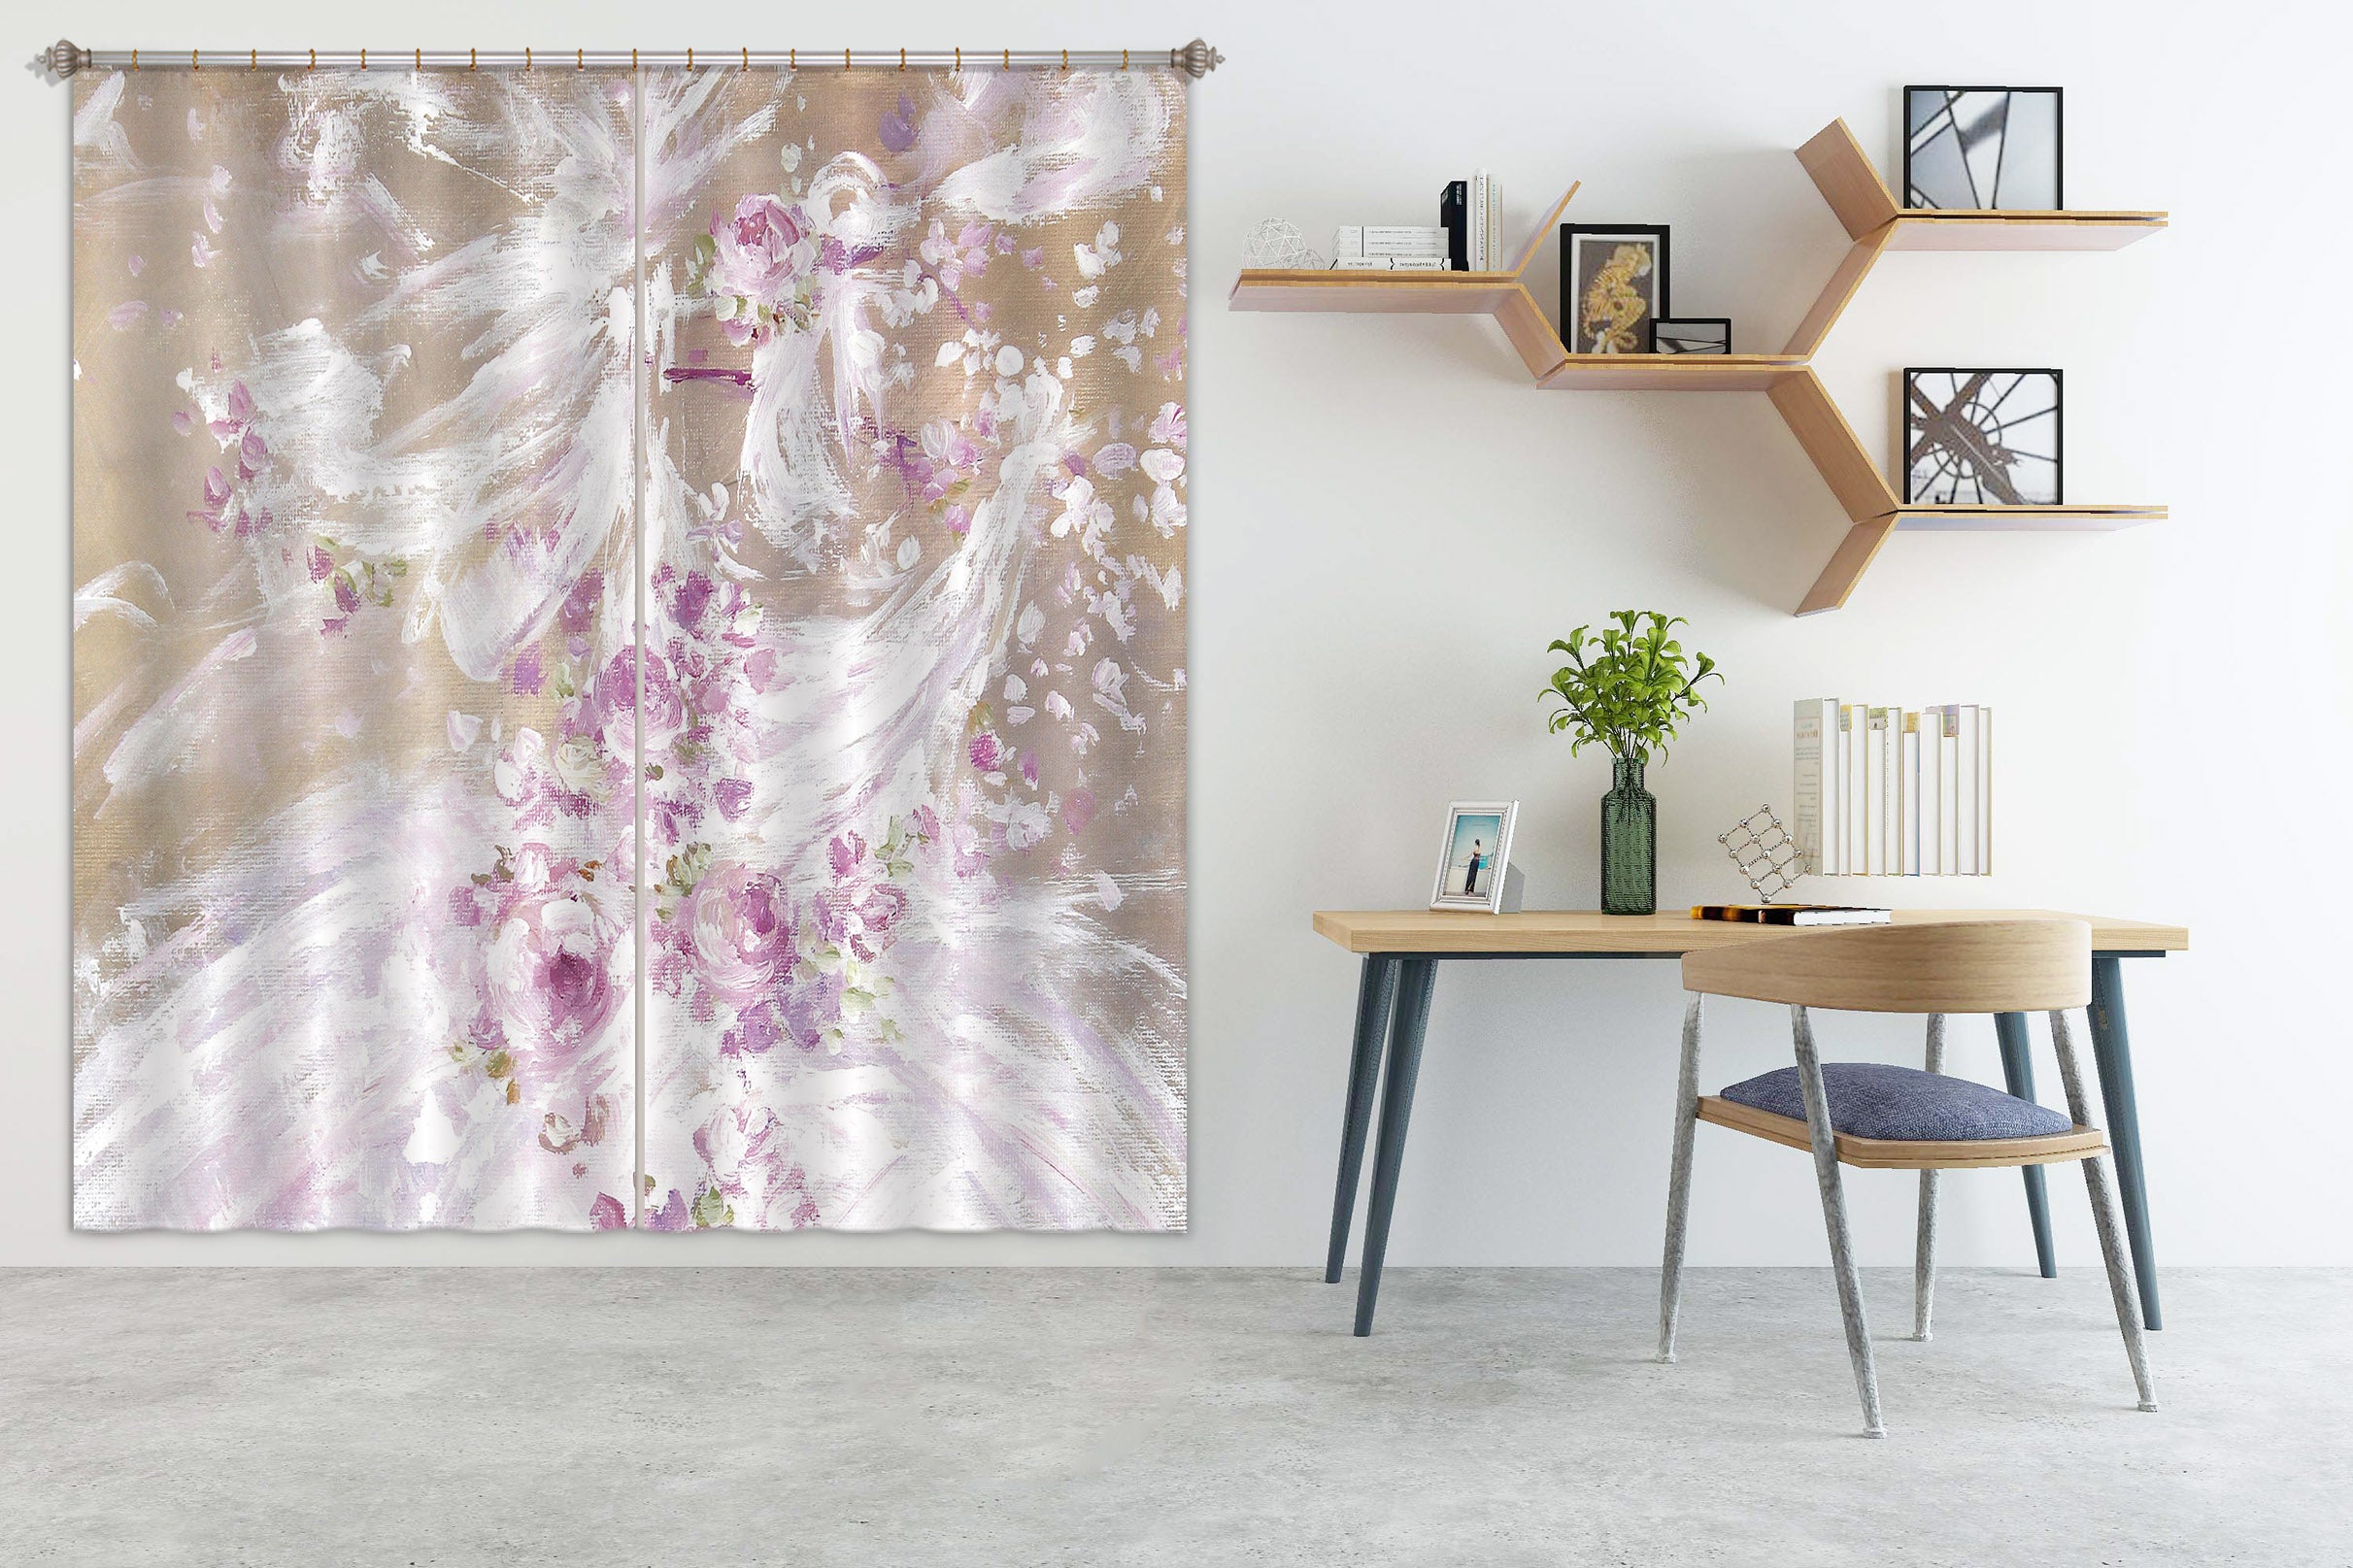 3D White Skirt Pink Petals 3089 Debi Coules Curtain Curtains Drapes